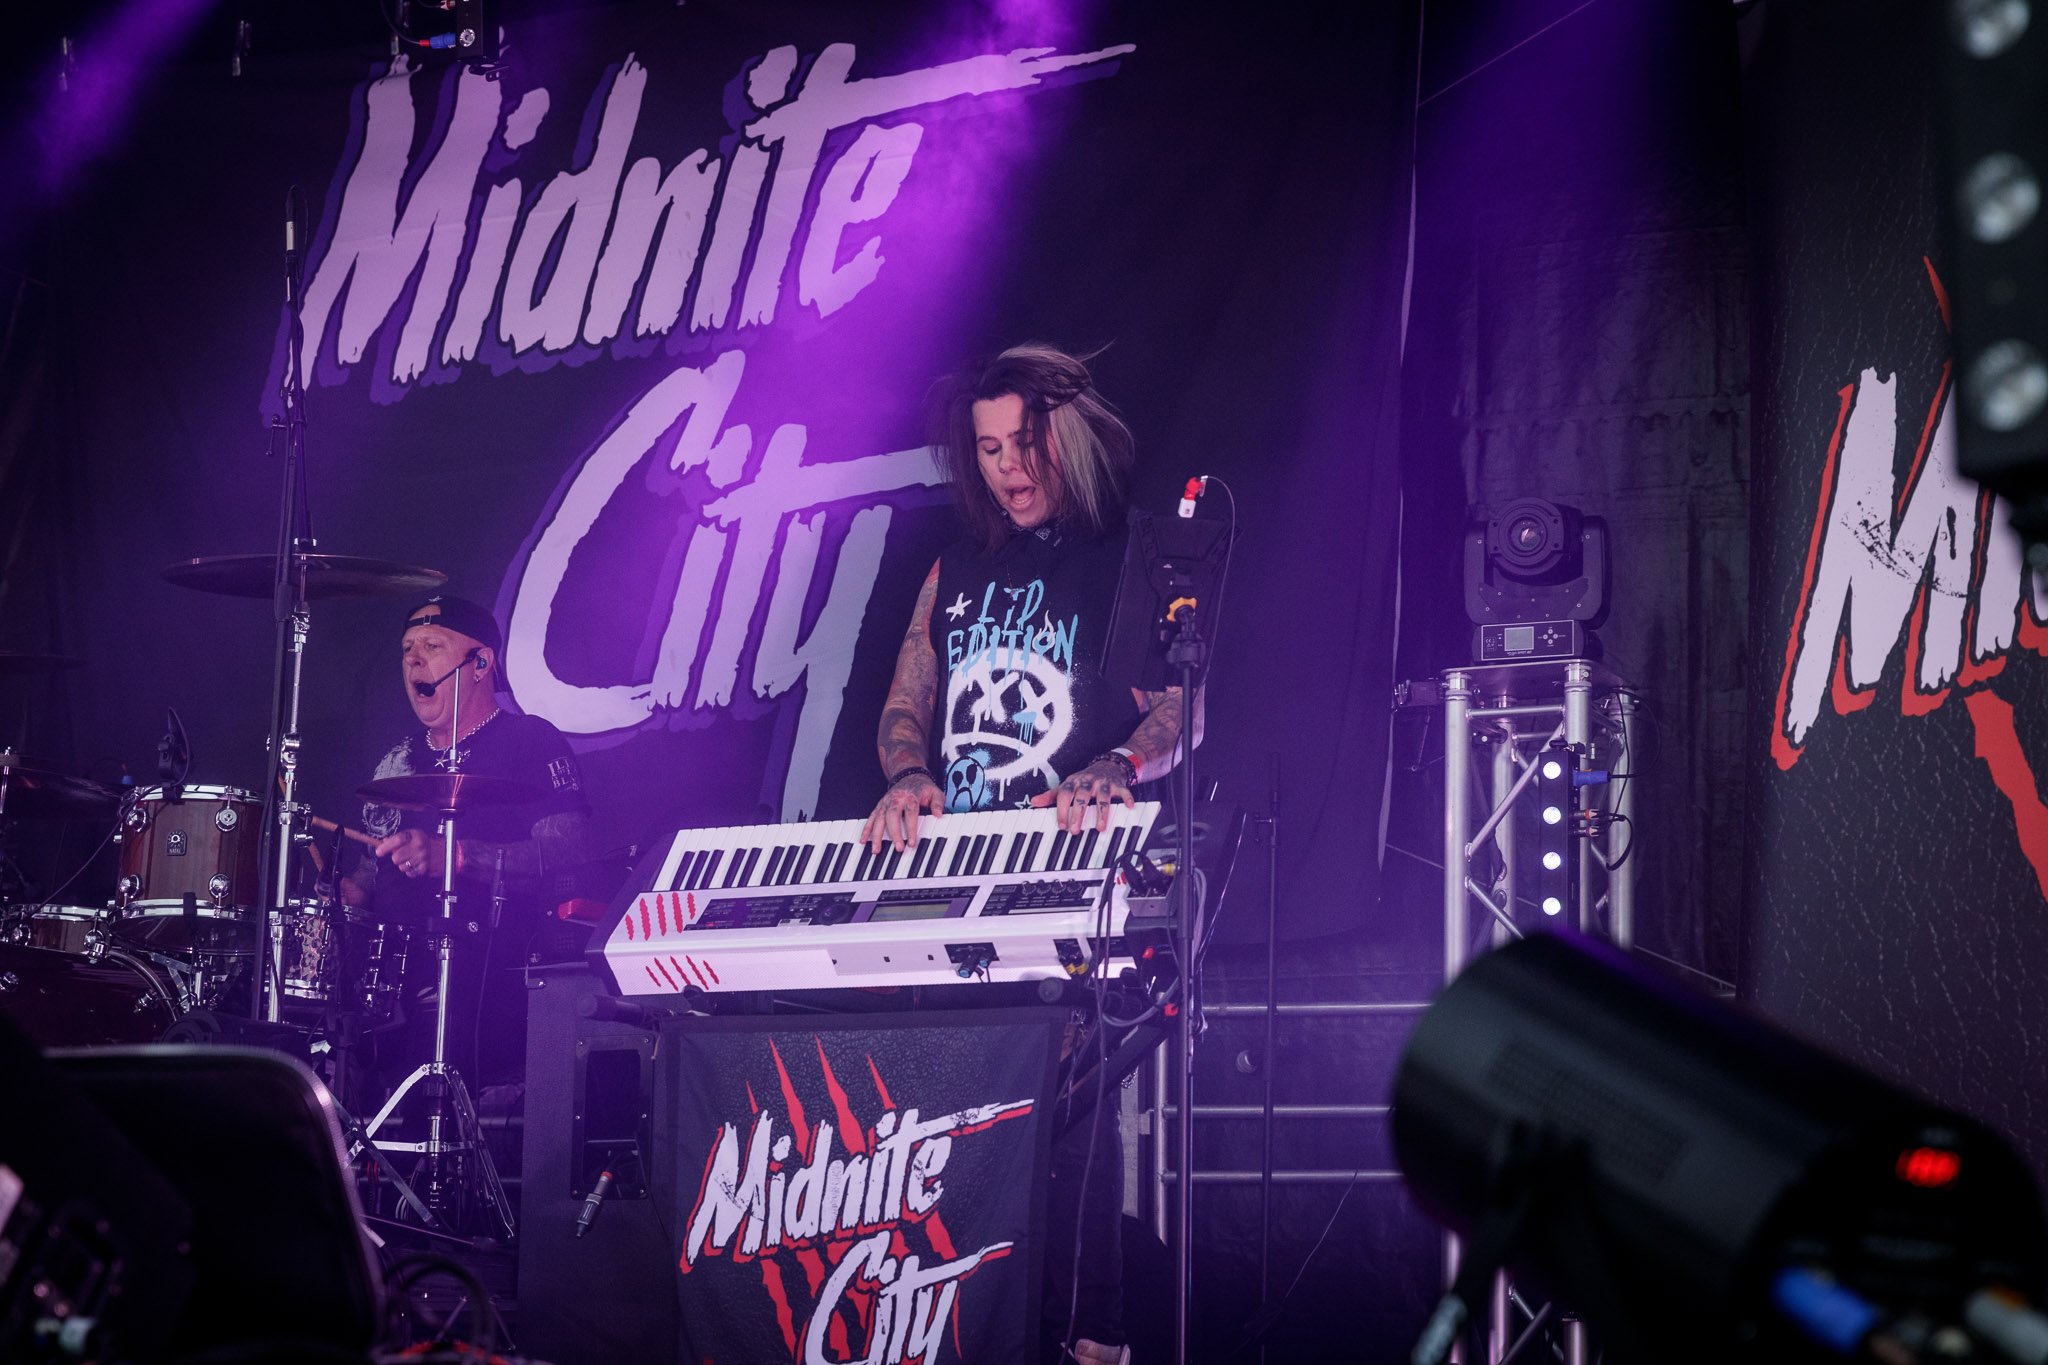 Midnite City at the Call of The Wild Festival on May 22nd 2022 